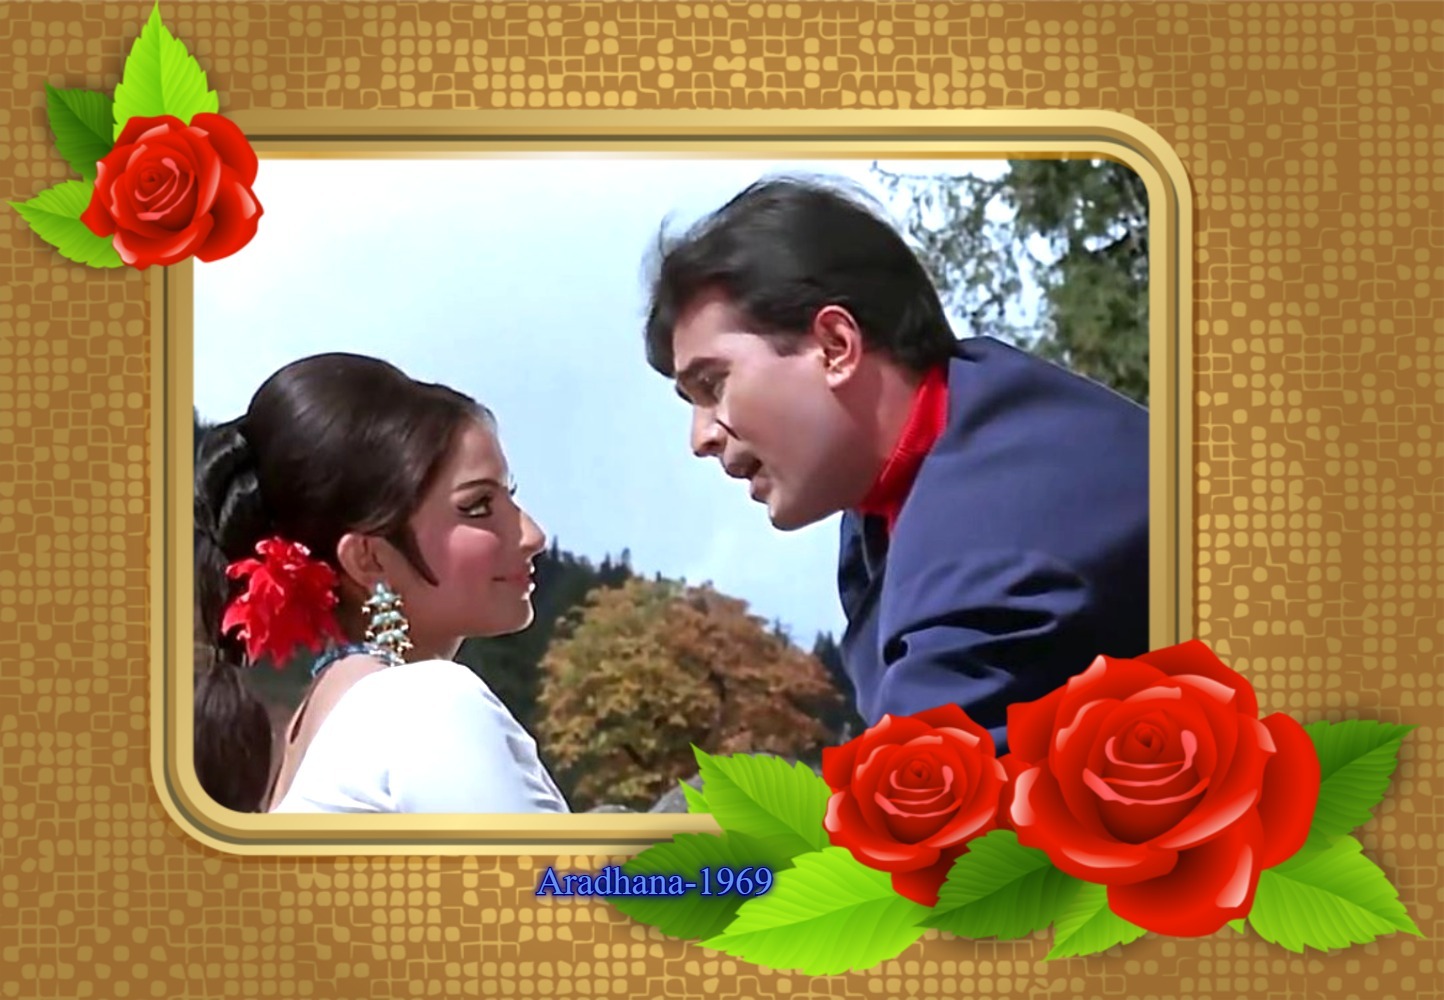 Read more about the article “Rajesh Khanna- A Charismatic Superstar”